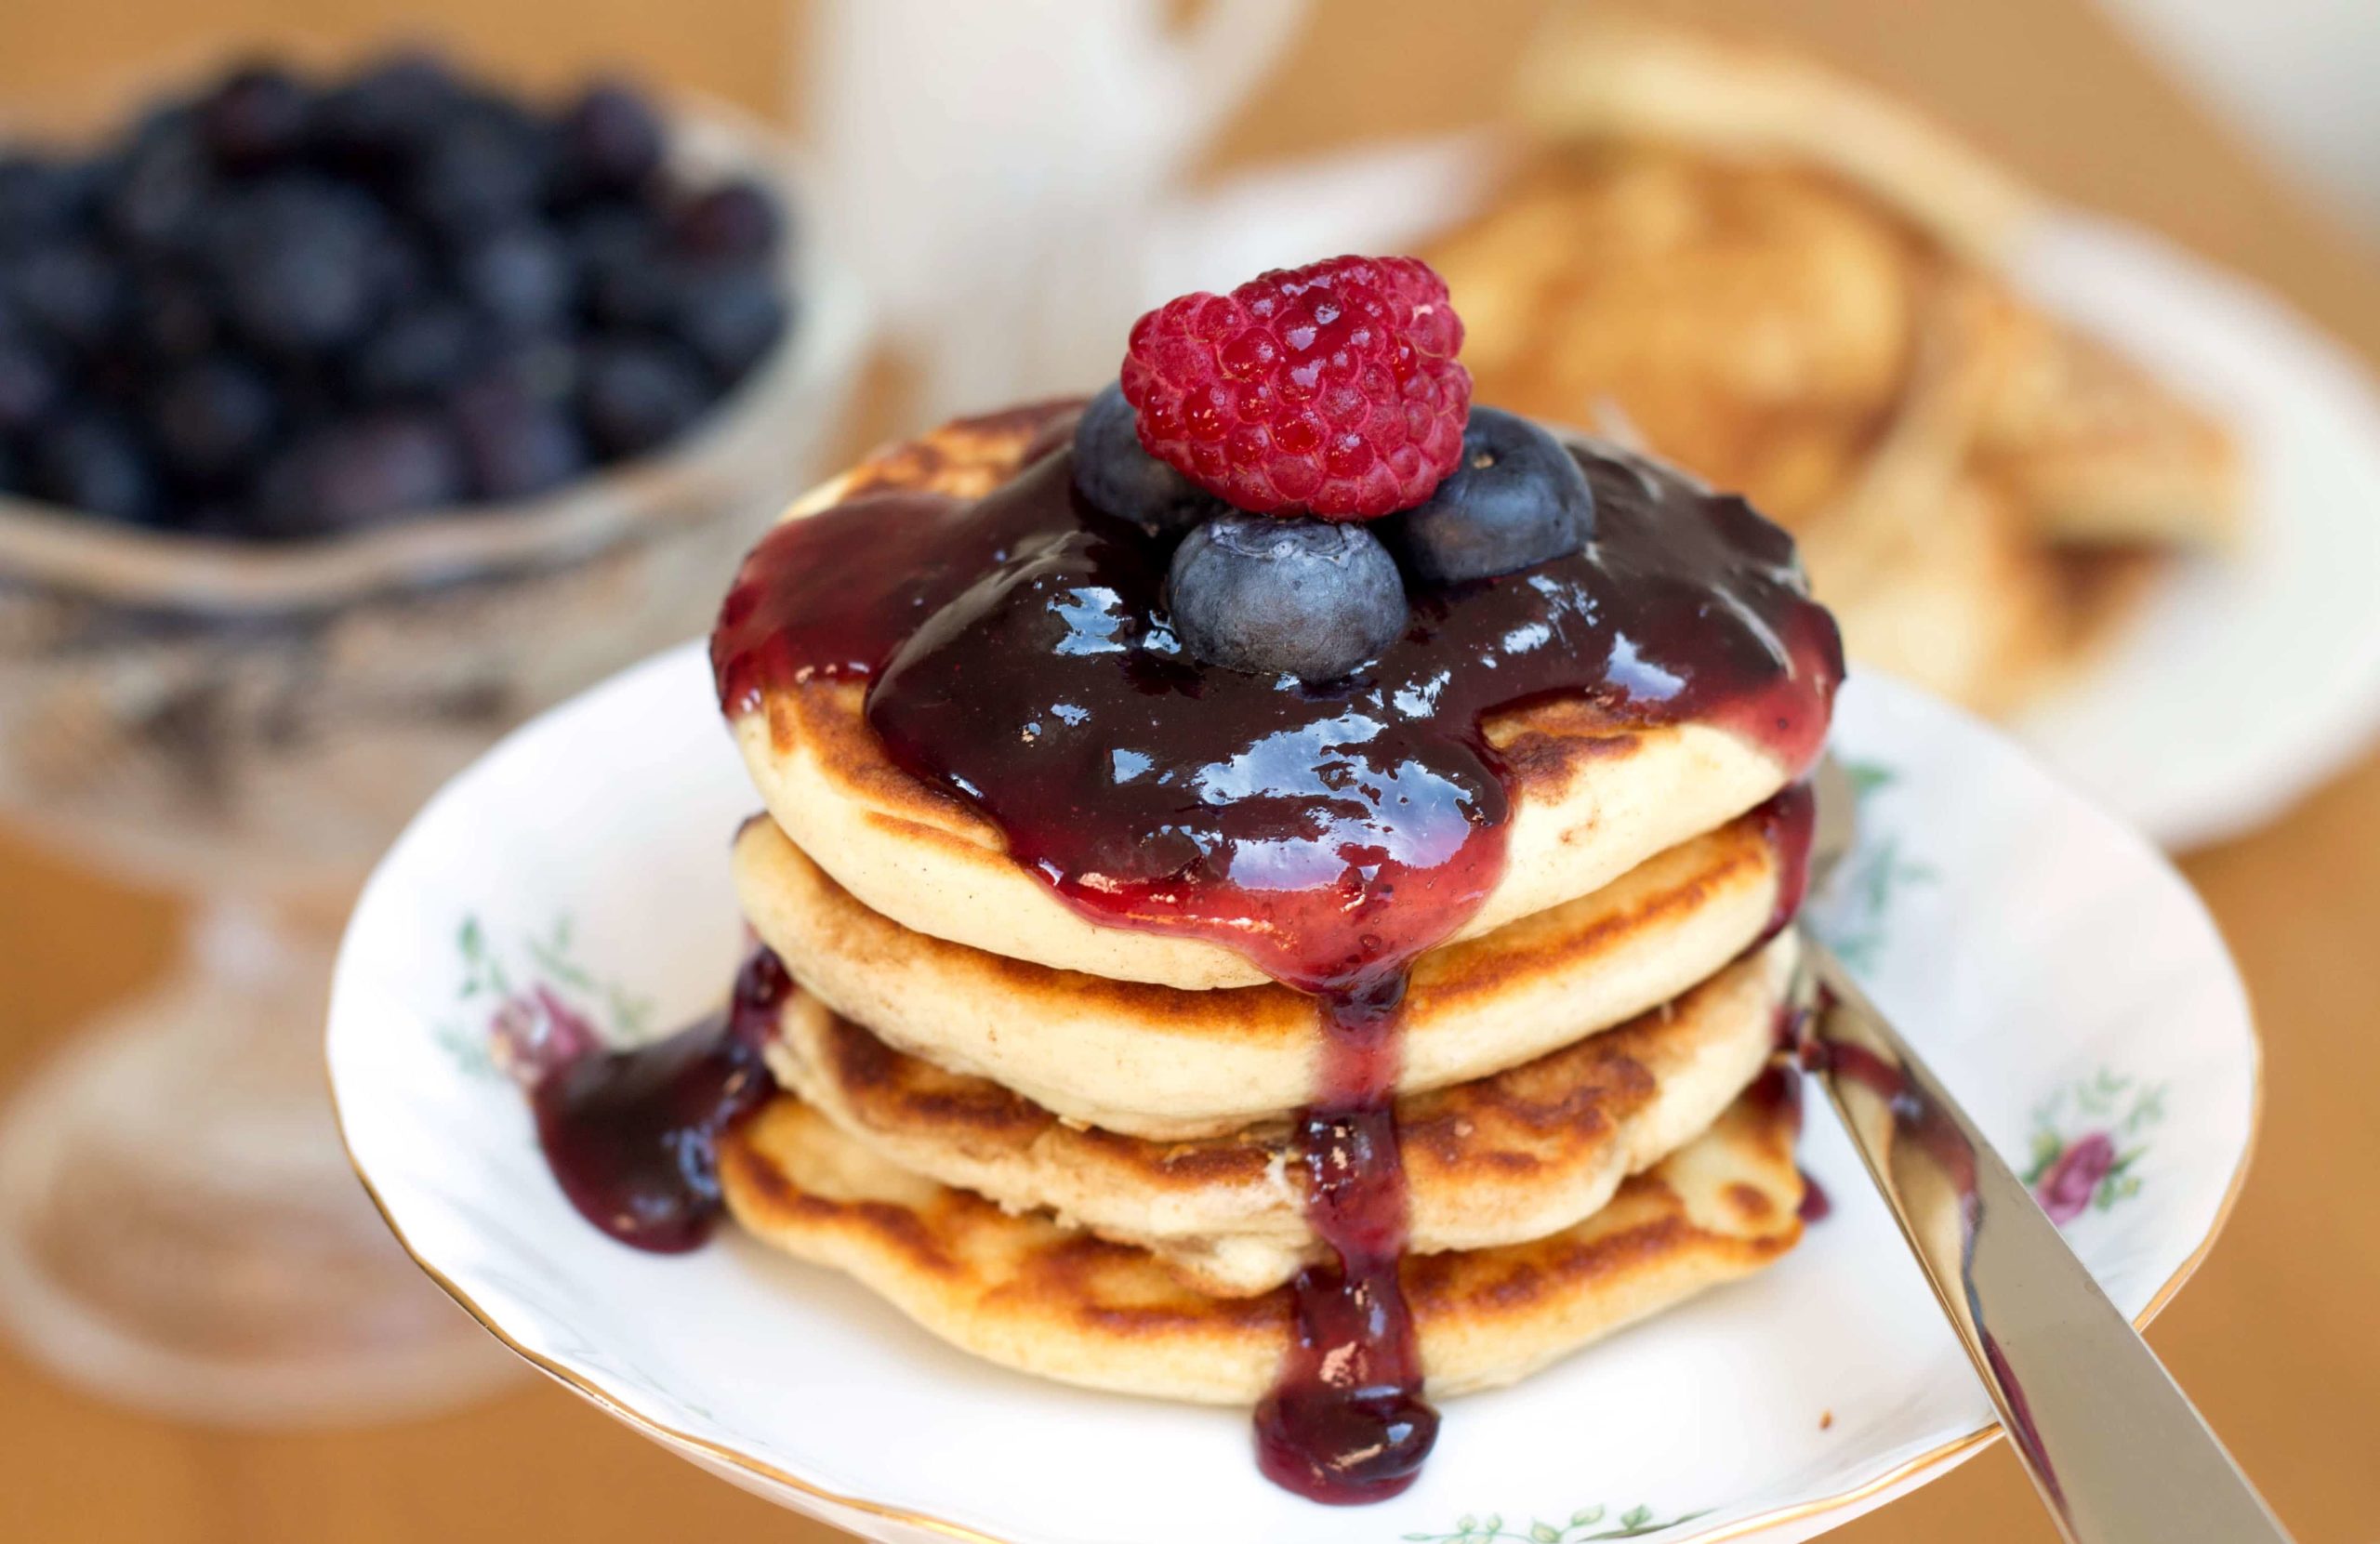 Scotch Pancakes - This dish is perfect for breakfast or a served for brunch.